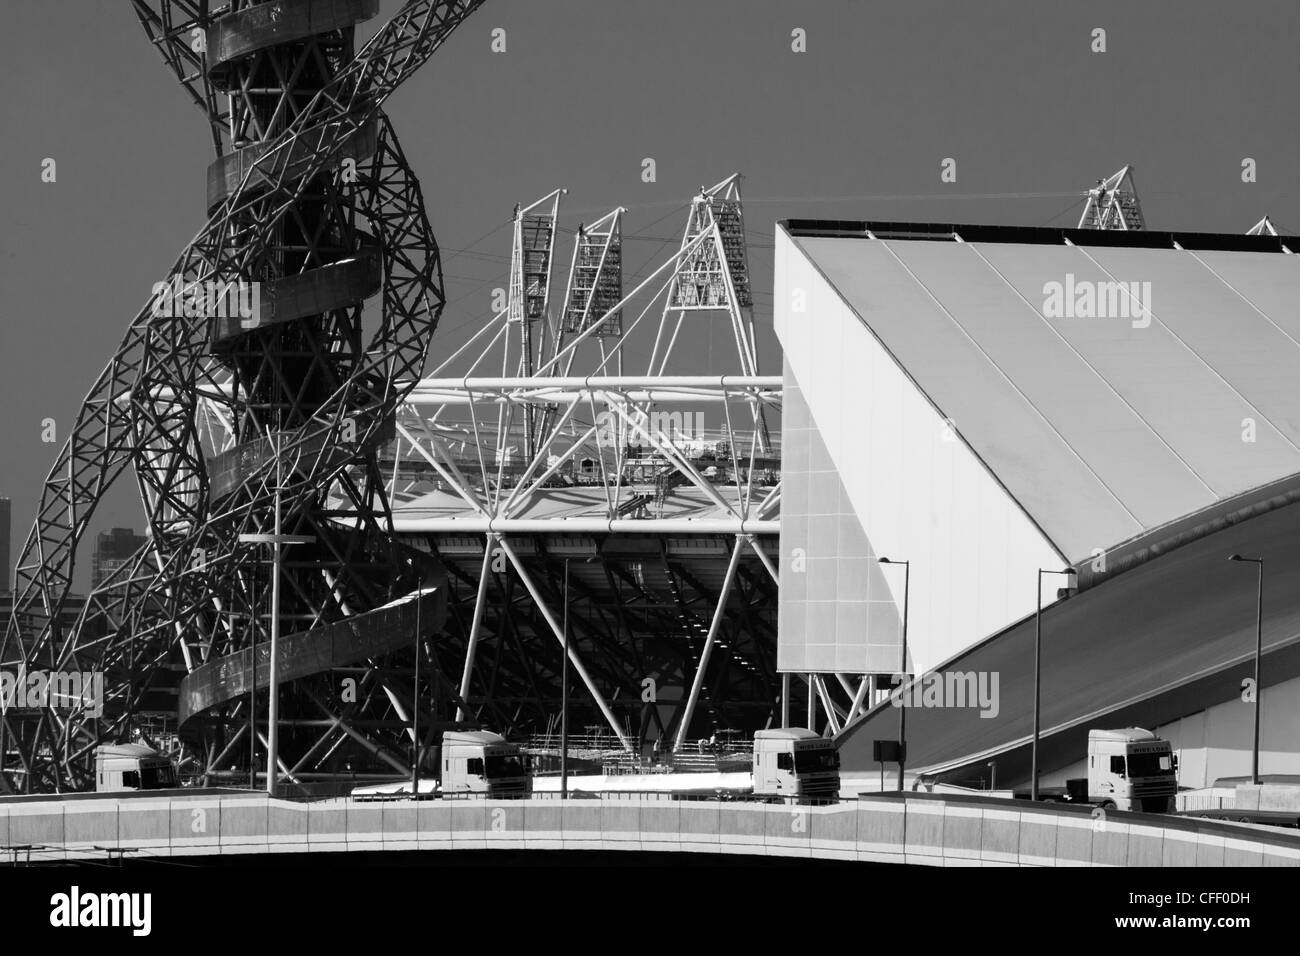 Landscape of 2012 Olympic construction site showing Aquatics centre, The Orbit art tower and the main stadium at Stratford. Stock Photo